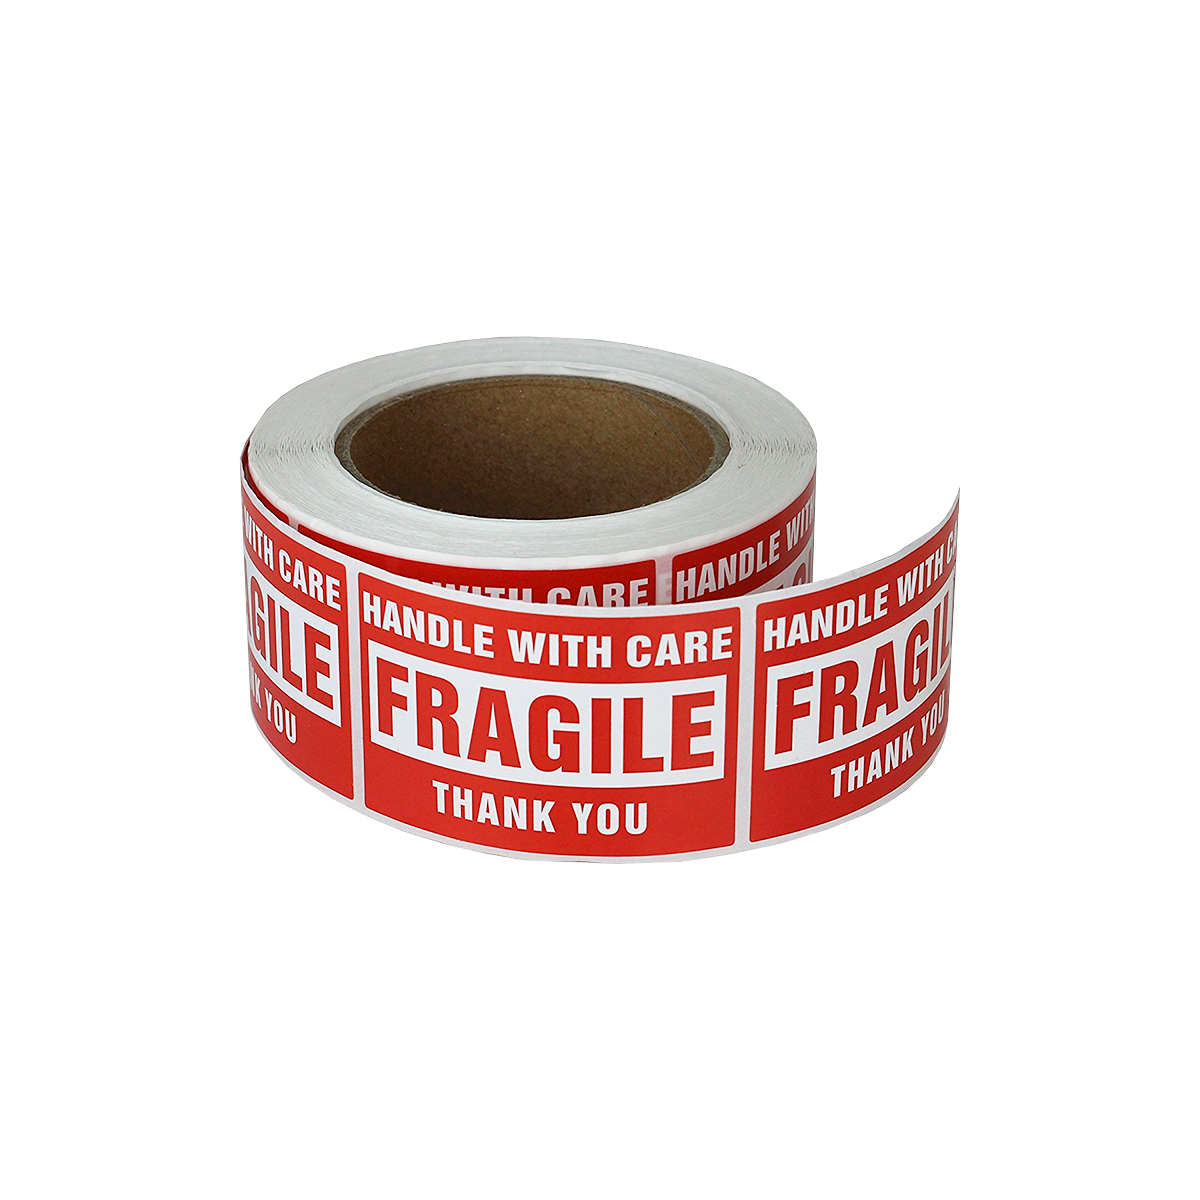 25 x 75mm FRAGILE HANDLE WITH CARE Postage Postal Labels 12 PACK 